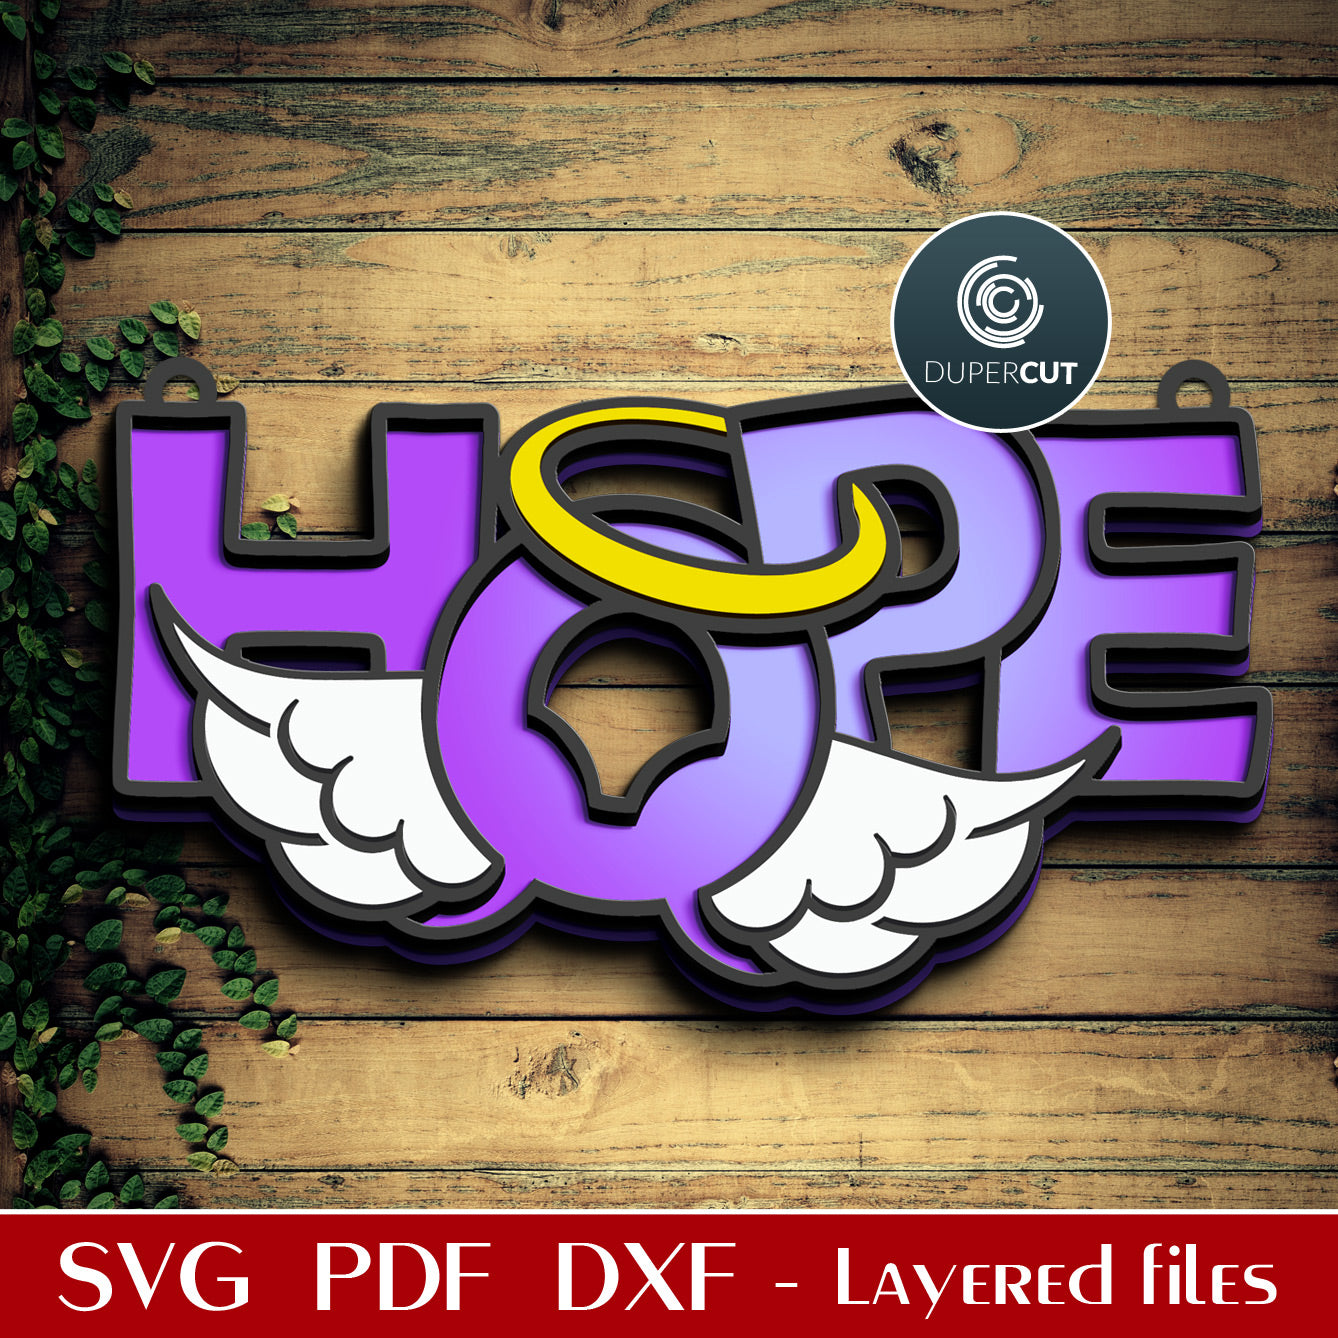 Hope with angel wings Christmas sign door hanger pattern - SVG DXF layered cutting files for Glowforge, Cricut, scroll saw, CNC plasma machines by DuperCut.com